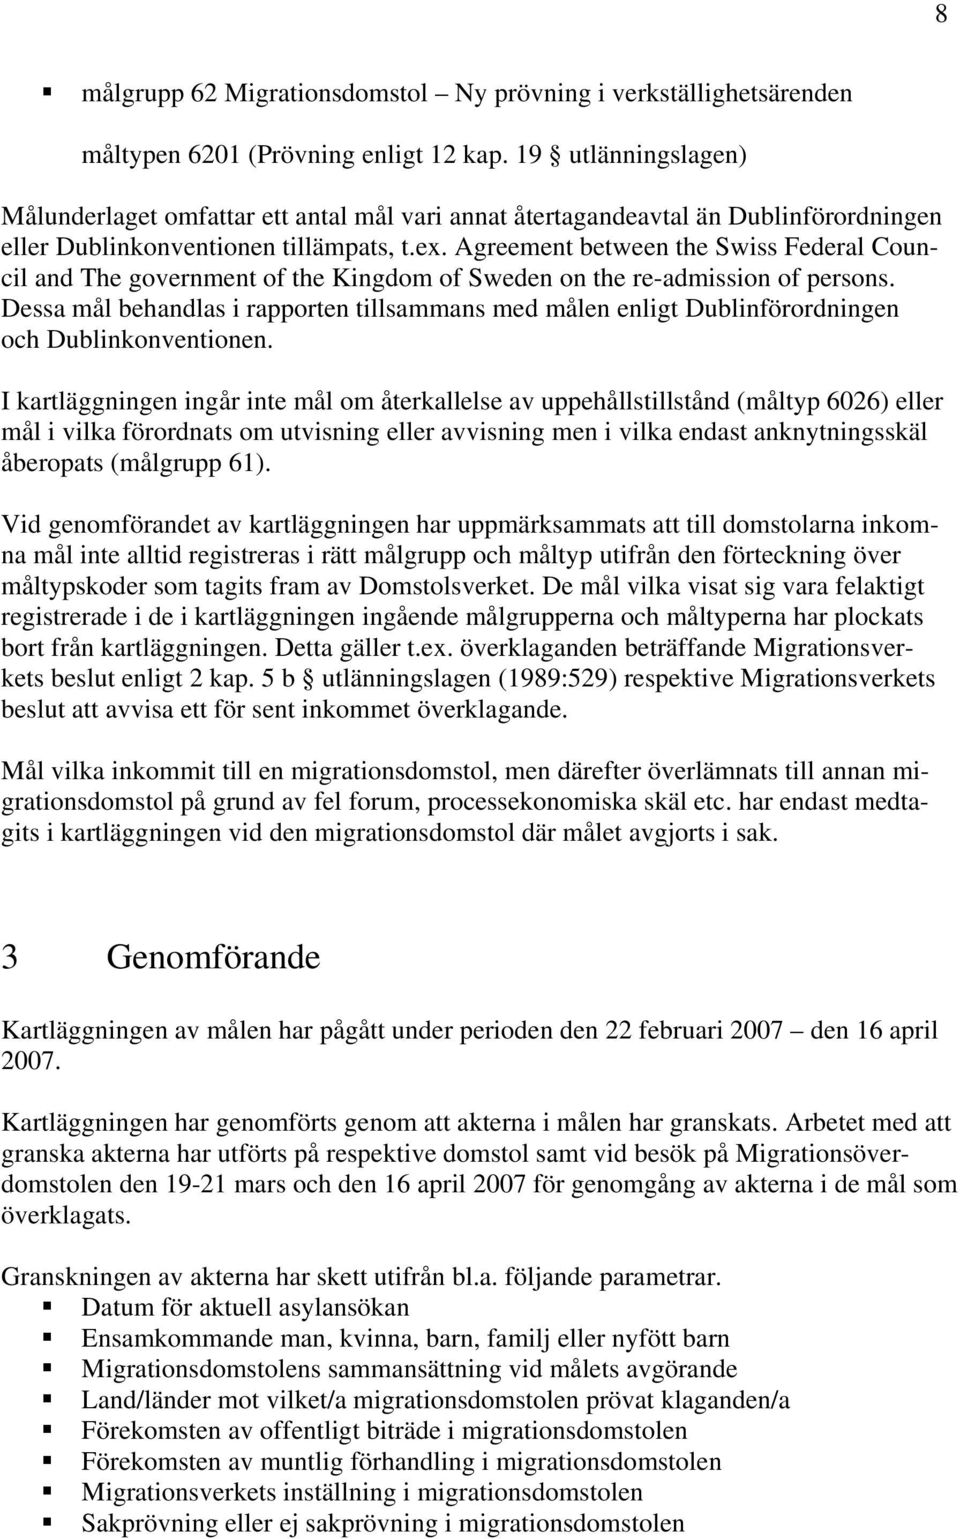 Agreement between the Swiss Federal Council and The government of the Kingdom of Sweden on the re-admission of persons.